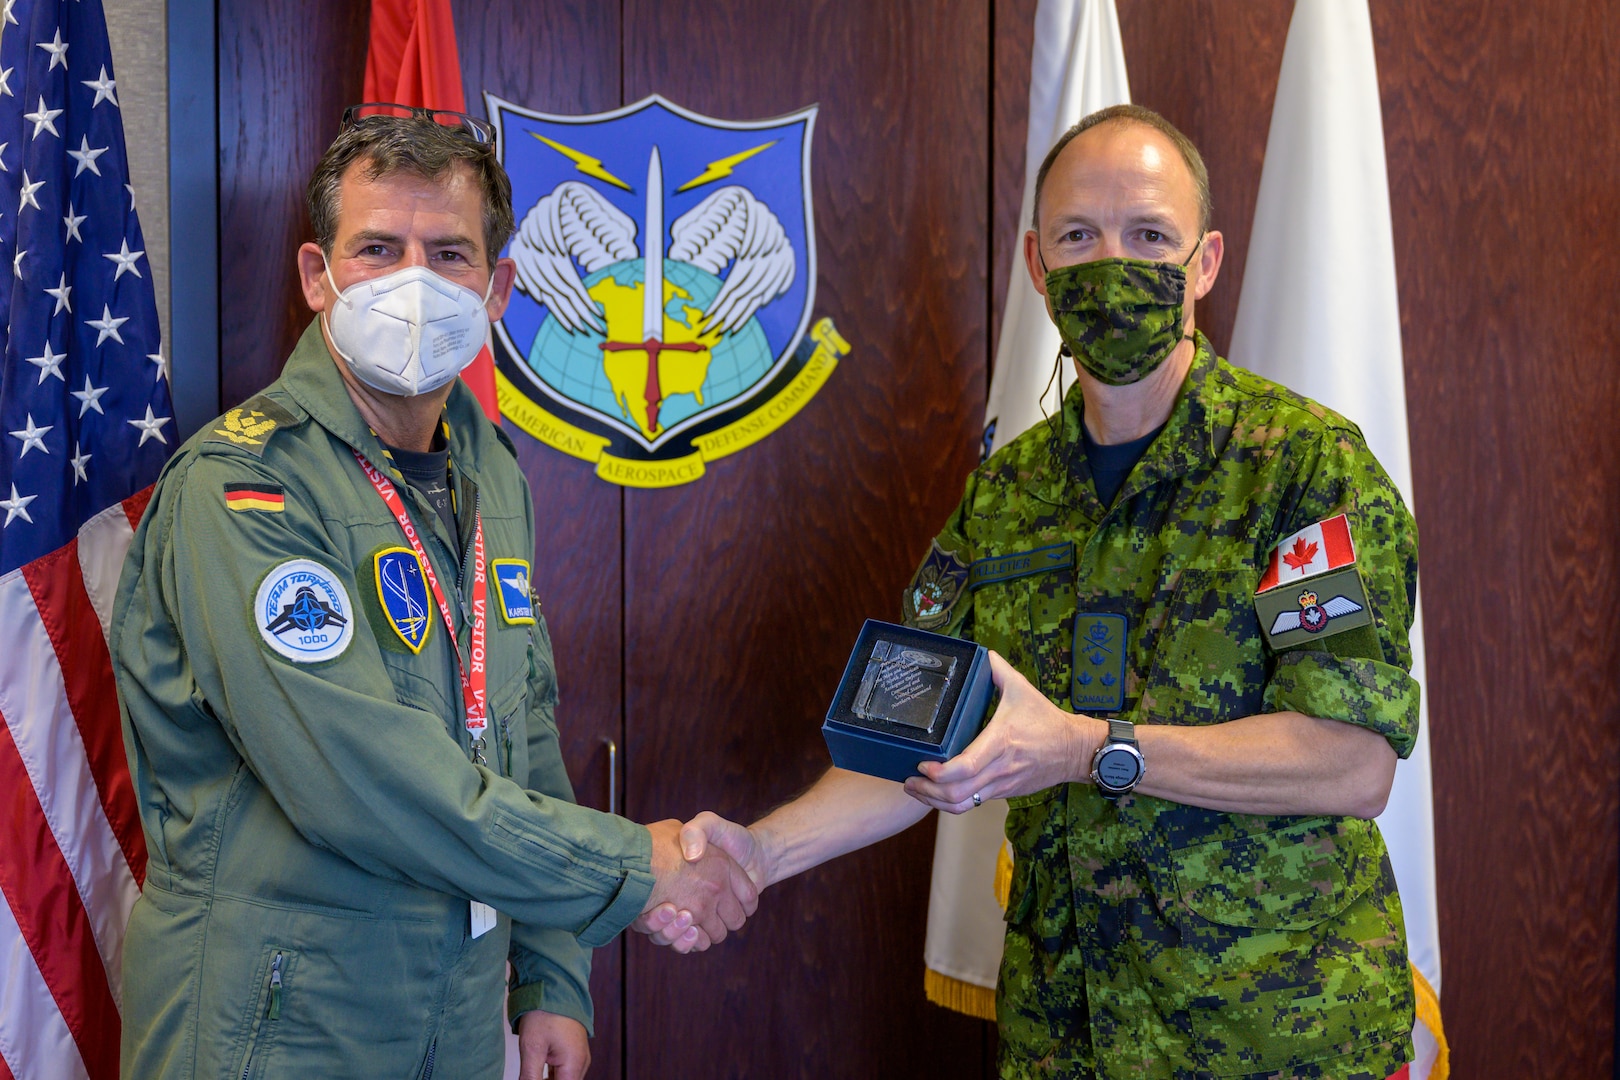 German Air Force Major-General Karsten Stoye, NATO’s Chief of Staff Allied Air Command, exchanges gifts with Royal Canadian Air Force Lieutenant-General Alain Pelletier, Deputy Commander, North American Aerospace Defense Command, during his visit to the NORAD and U.S. Northern Command Headquarters at Peterson Space Force Base, Colorado, Aug. 23, 2021. Stoye traveled to the headquarters to receive information on the Global Information Dominance Experiments and discuss with leadership how NORAD and USNORTHCOM and NATO can collaborate on missile defense.